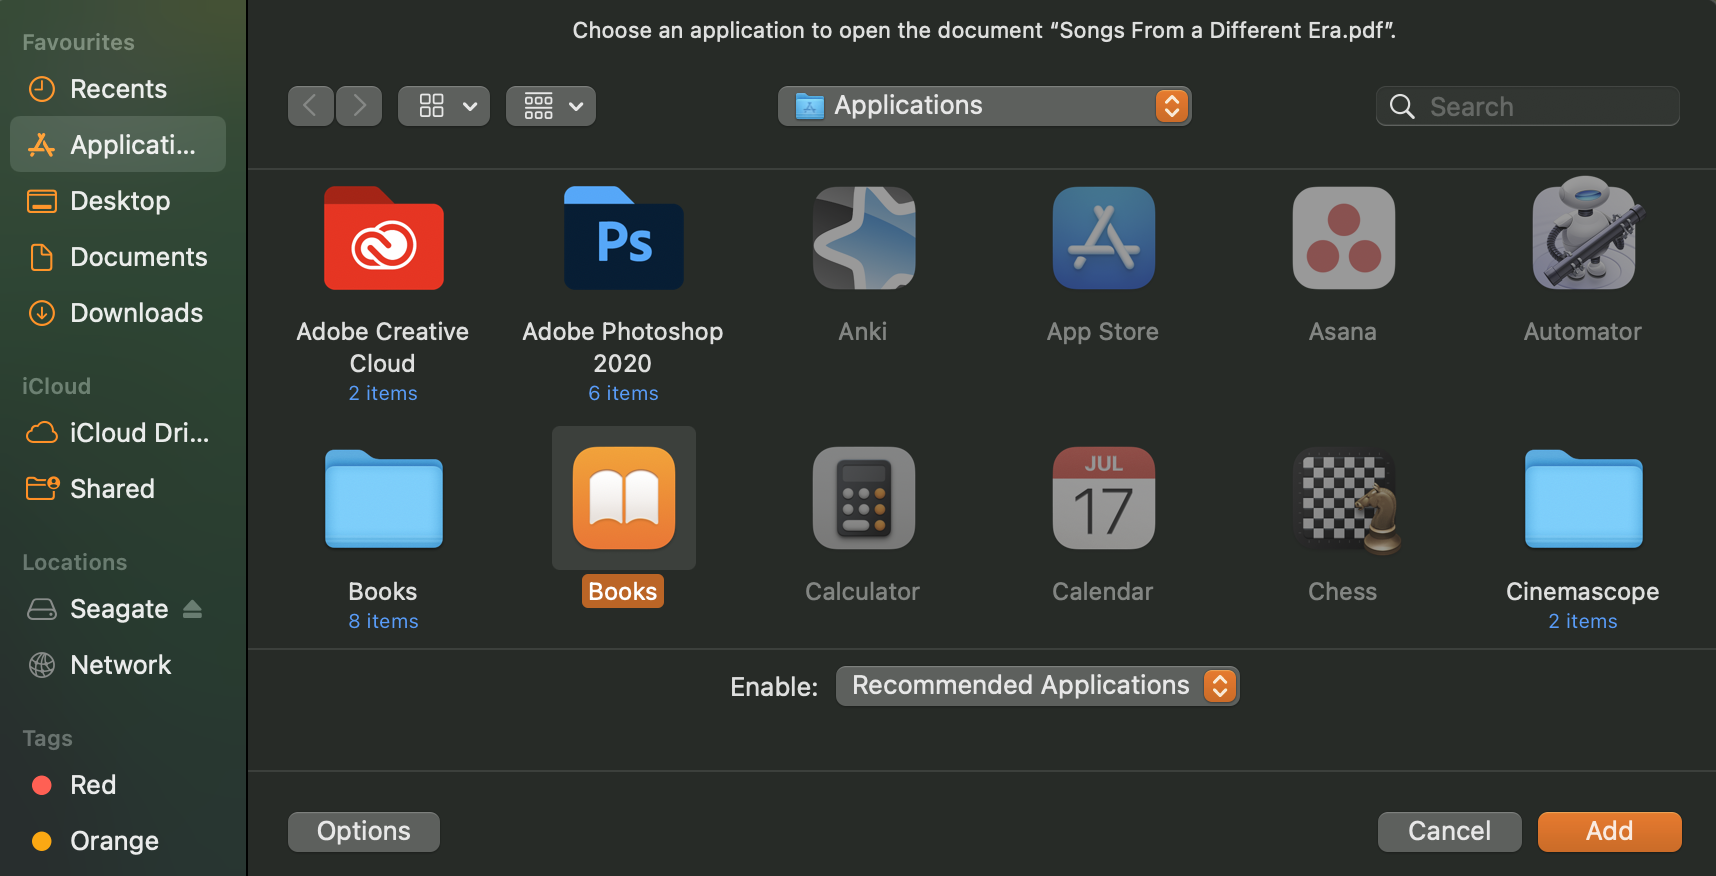 Enable Recommended Applications